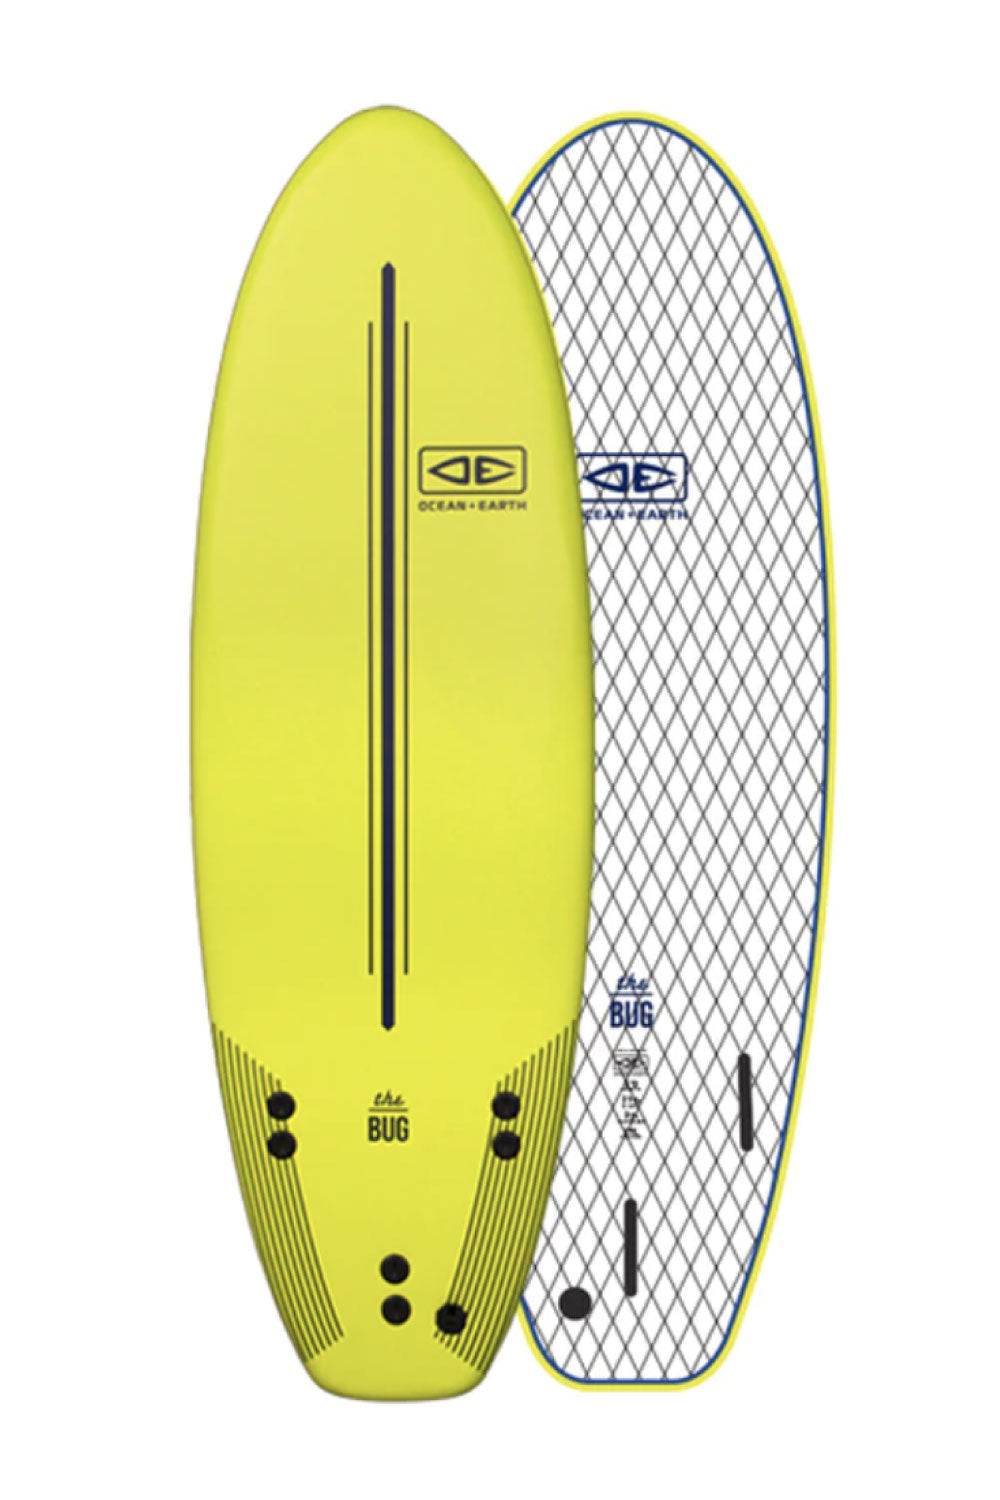 5'6 Ocean & Earth Bug Softboard - Comes with fins